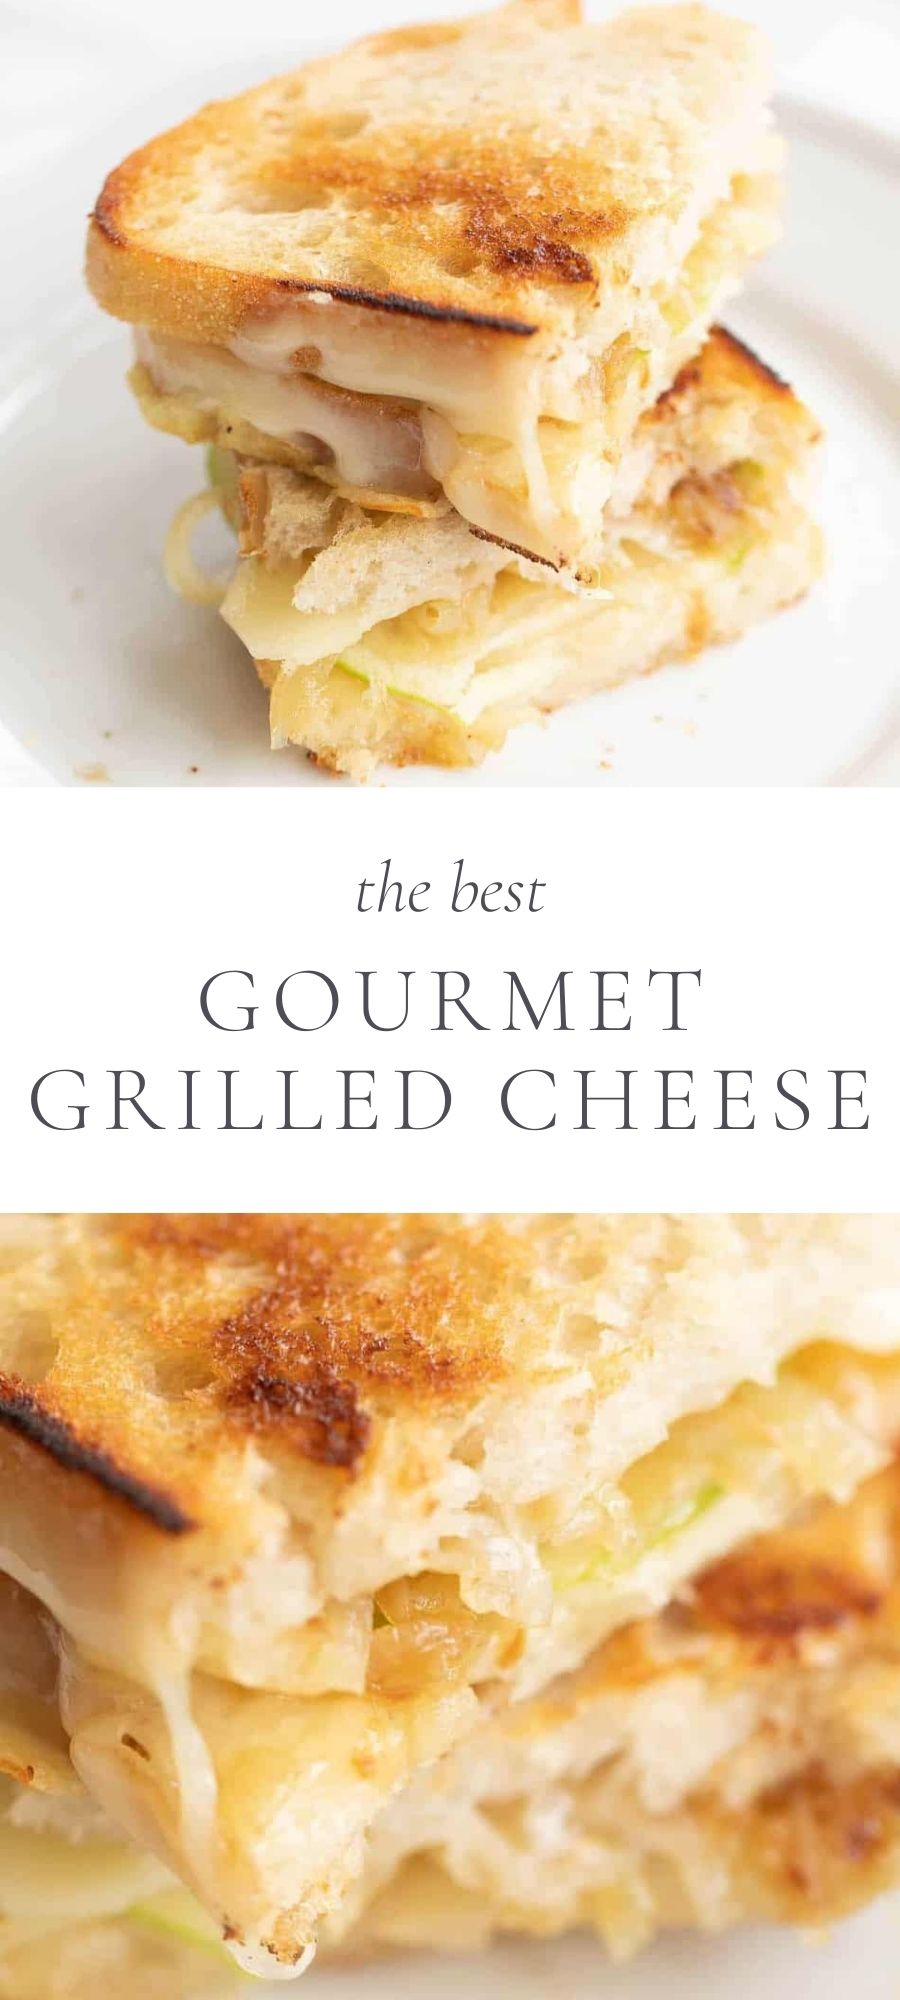 Gourmet Grilled Cheese sandwich